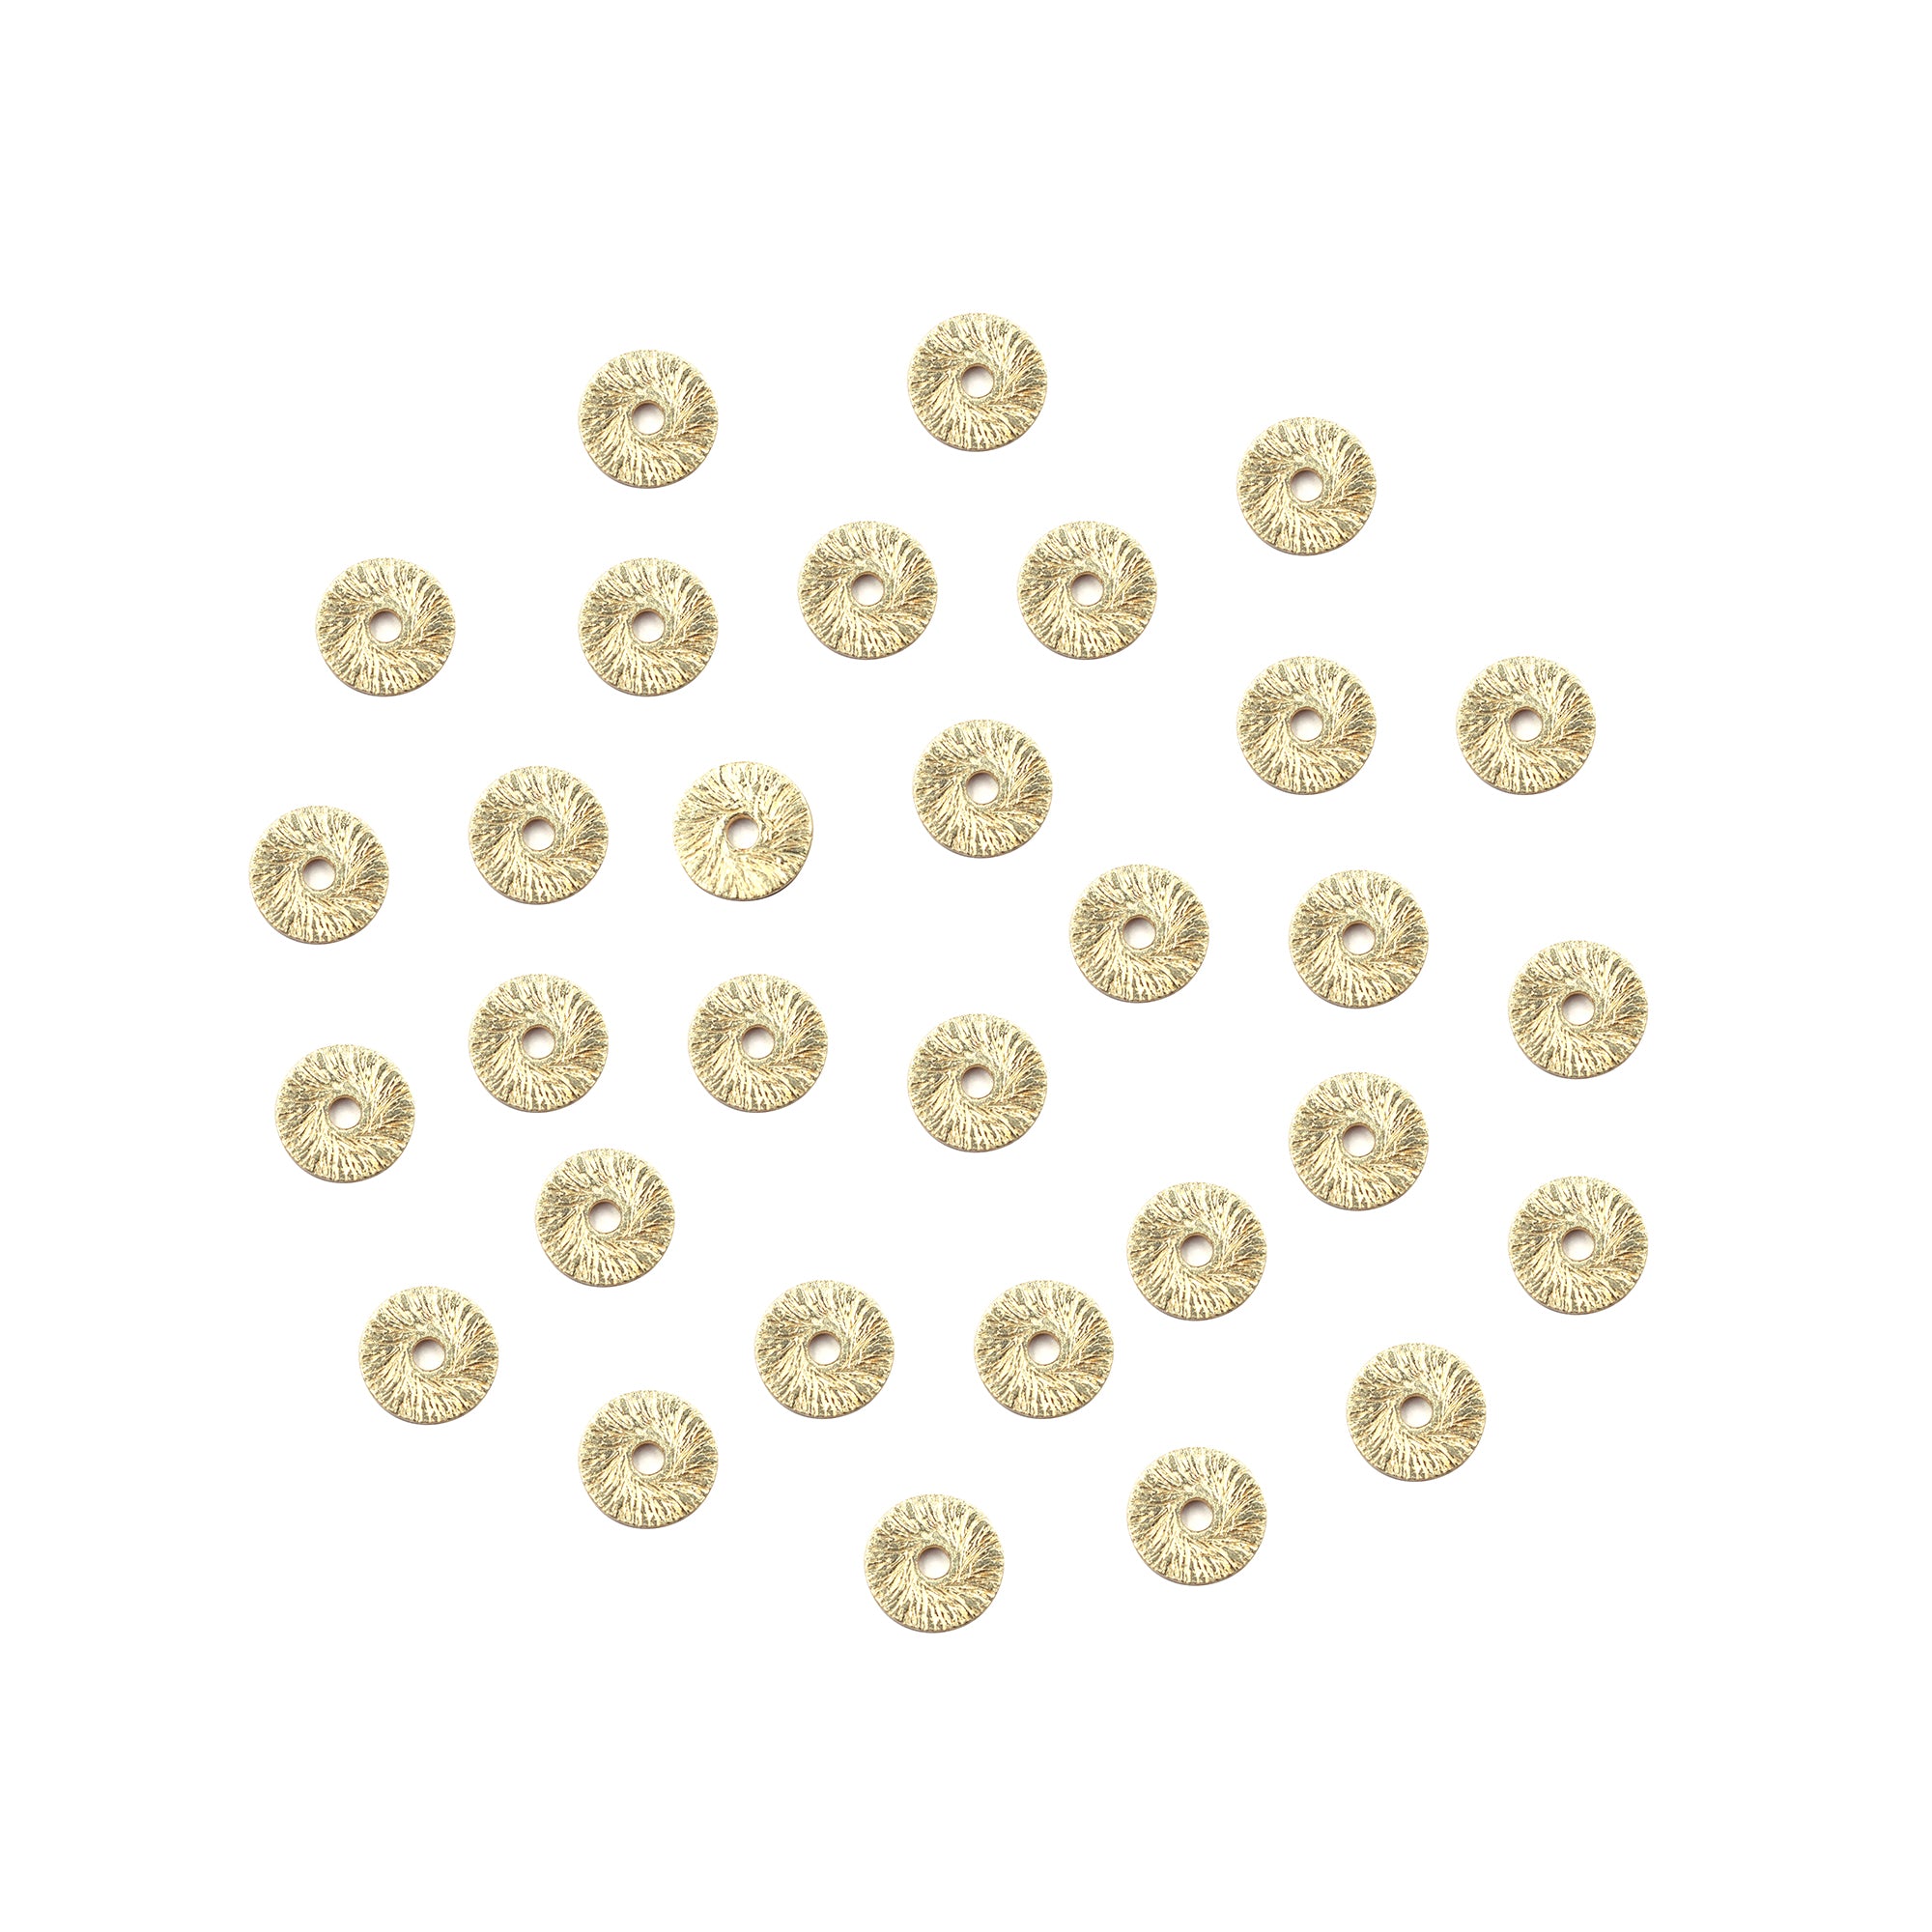 120 Pcs 6mm Flat Wavy Disc Brushed Matte Finish Beads Gold Plated Copper